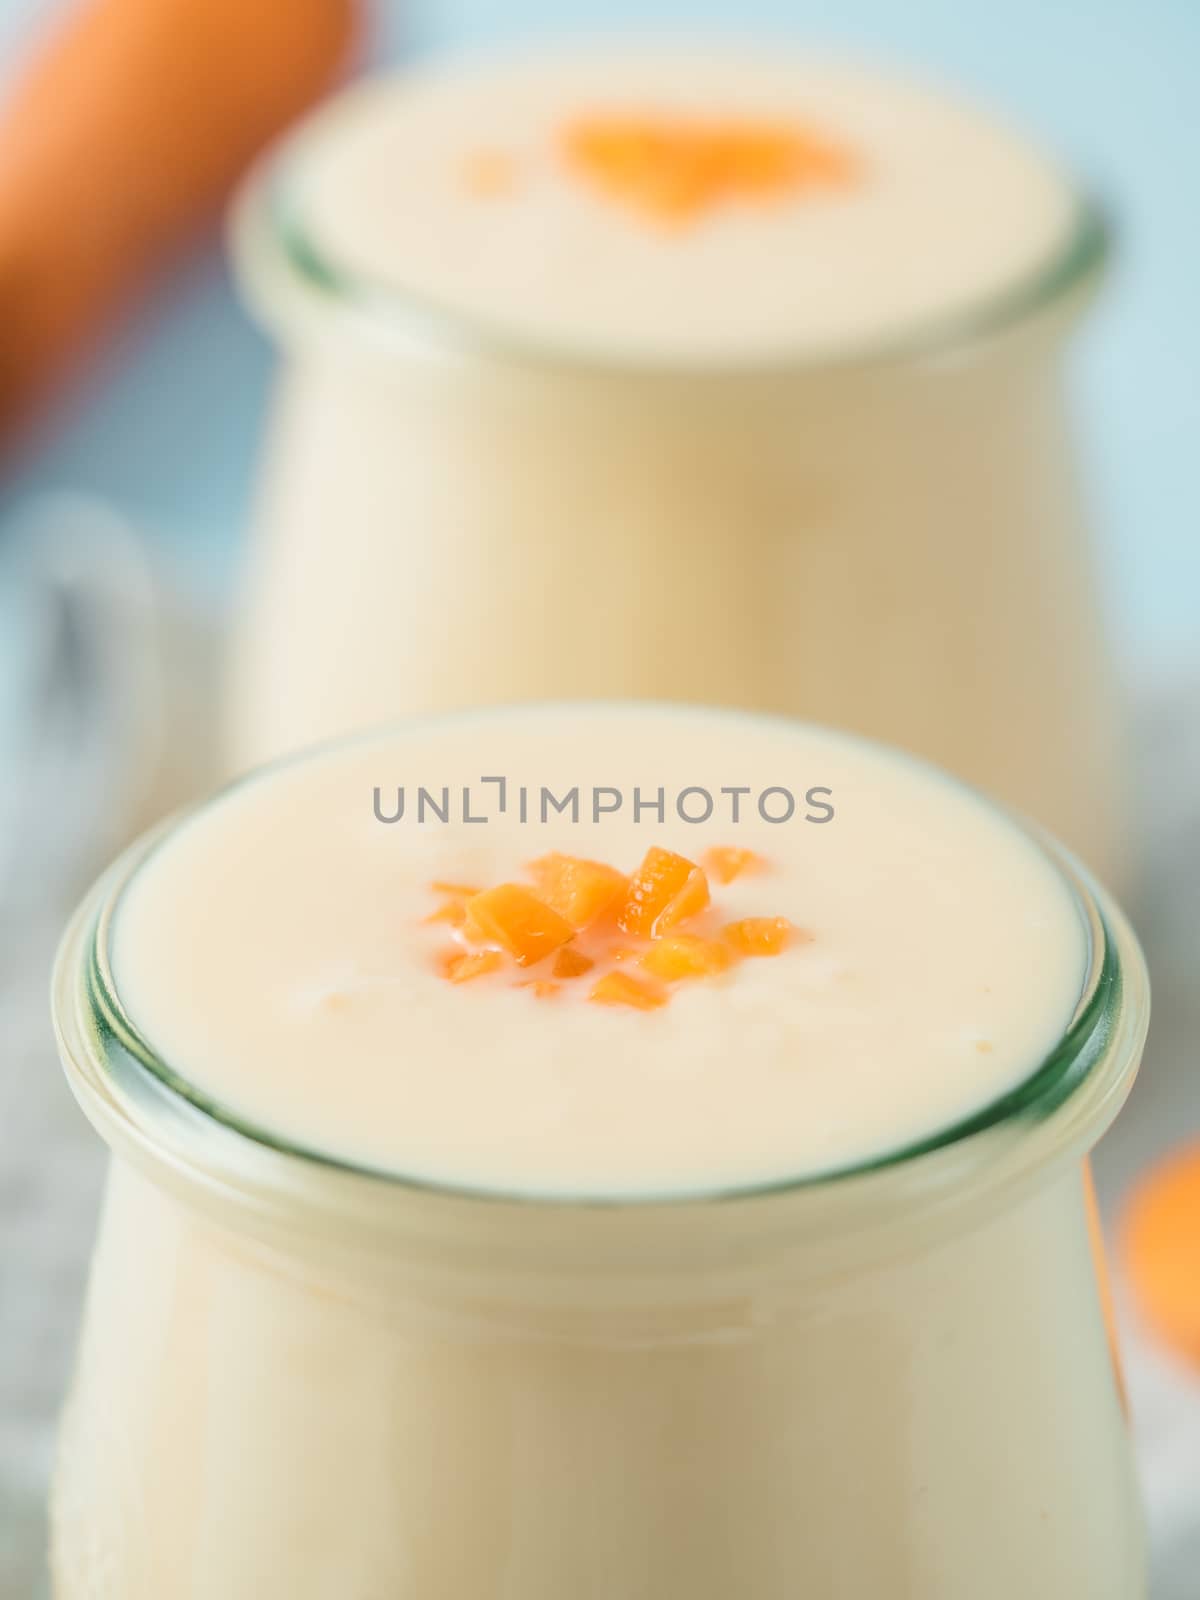 Yogurt with carrot. Vegetable yogurt. Two glass jar with yellow orange yoghurt or milkshake and fresh carrot on blue background. Copy space for text. Vertical.